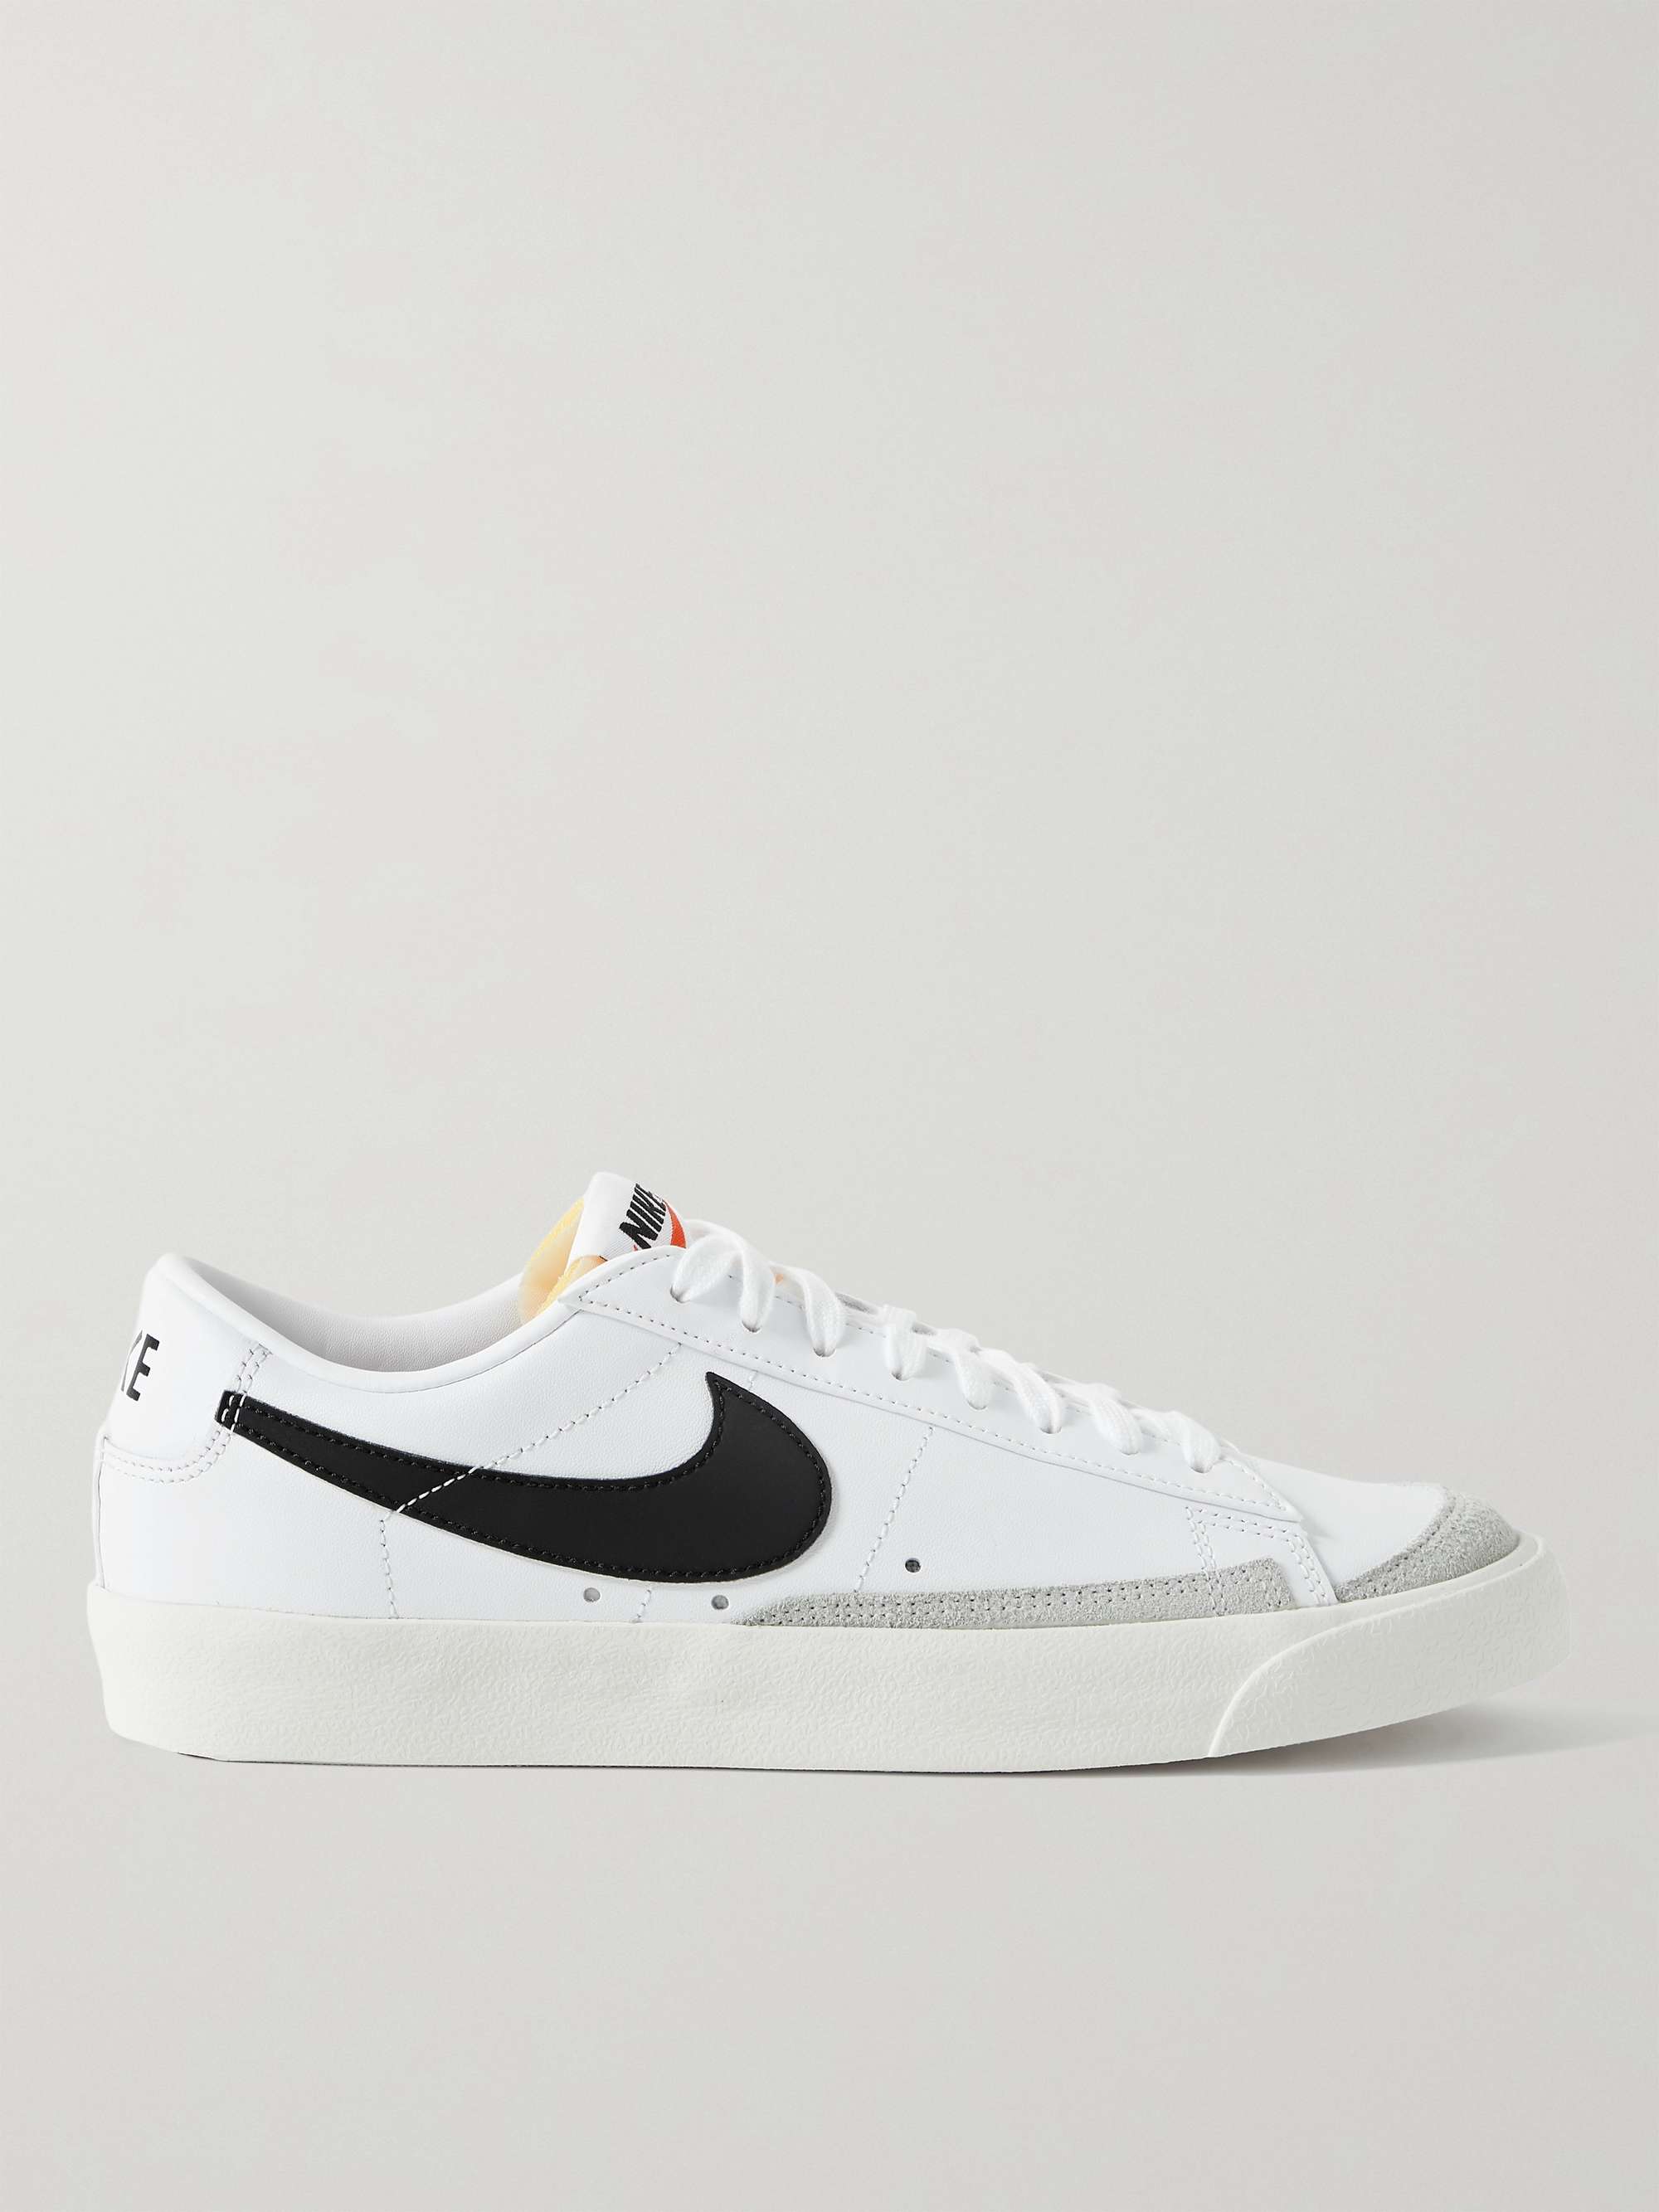 NIKE Blazer Low '77 Suede-Trimmed Leather Sneakers | MR PORTER